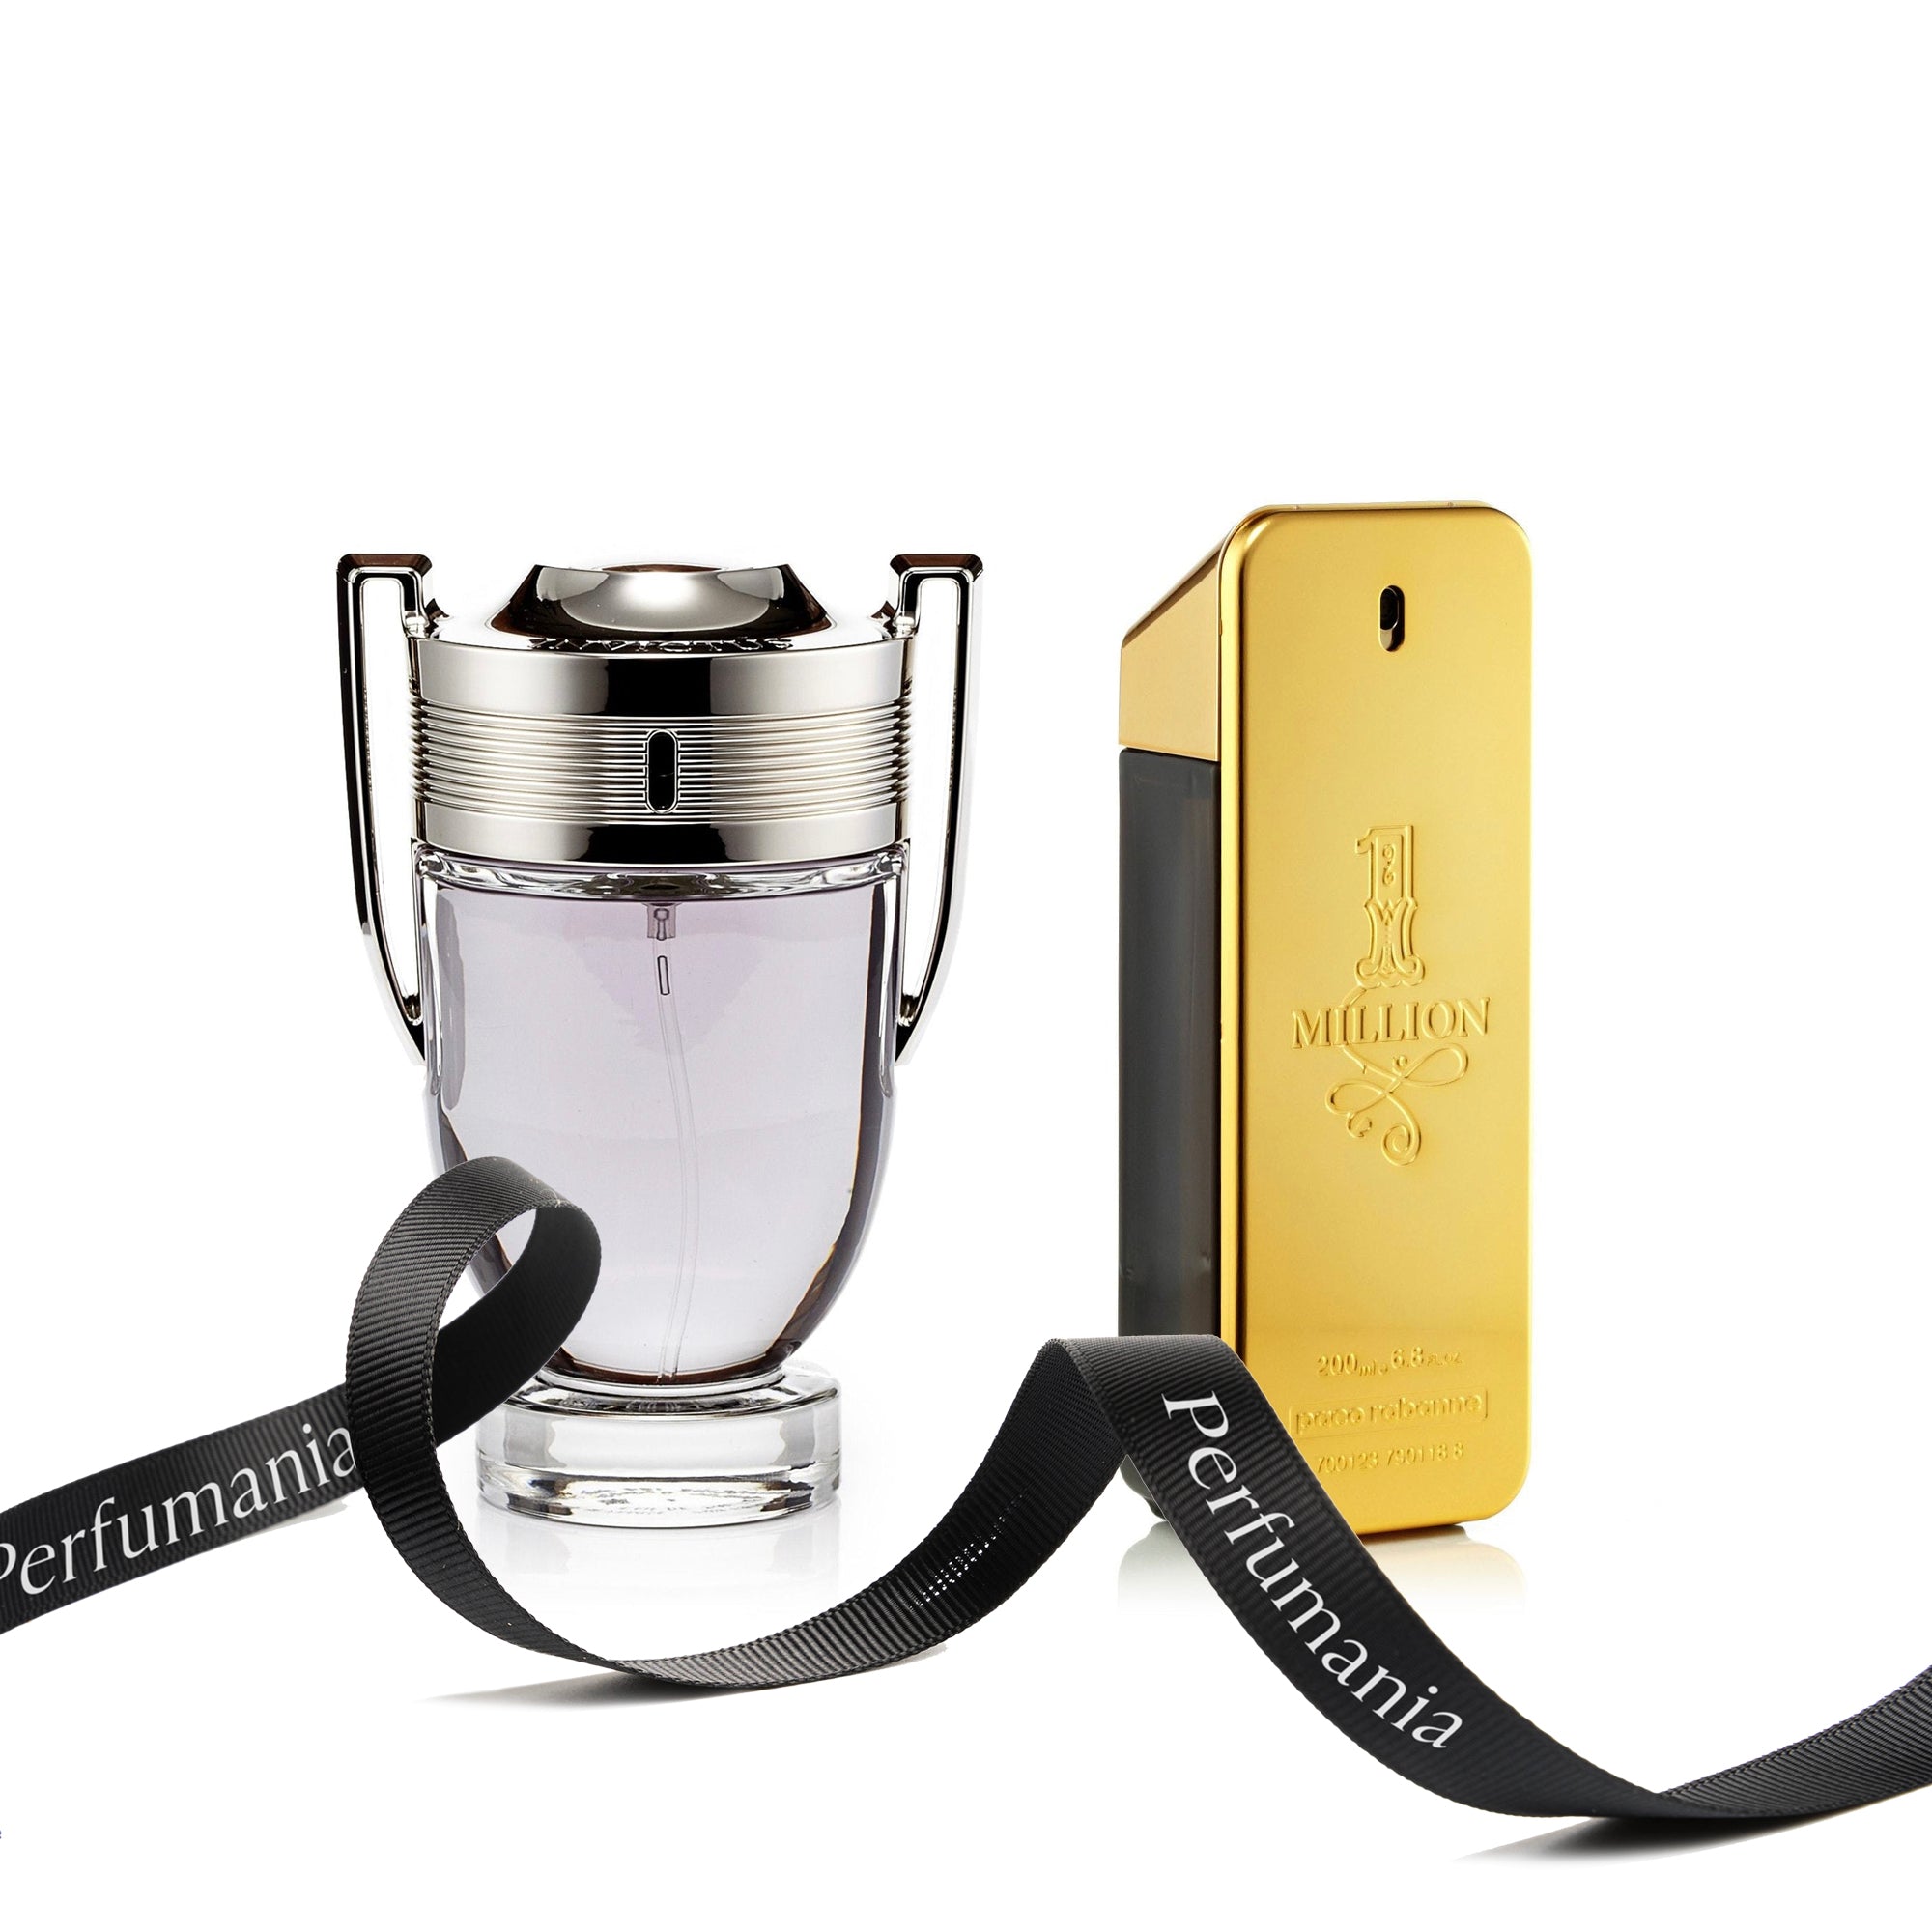 Bundle For Men: Invictus by Paco Rabanne and 1 Million by Paco Rabanne Featured image